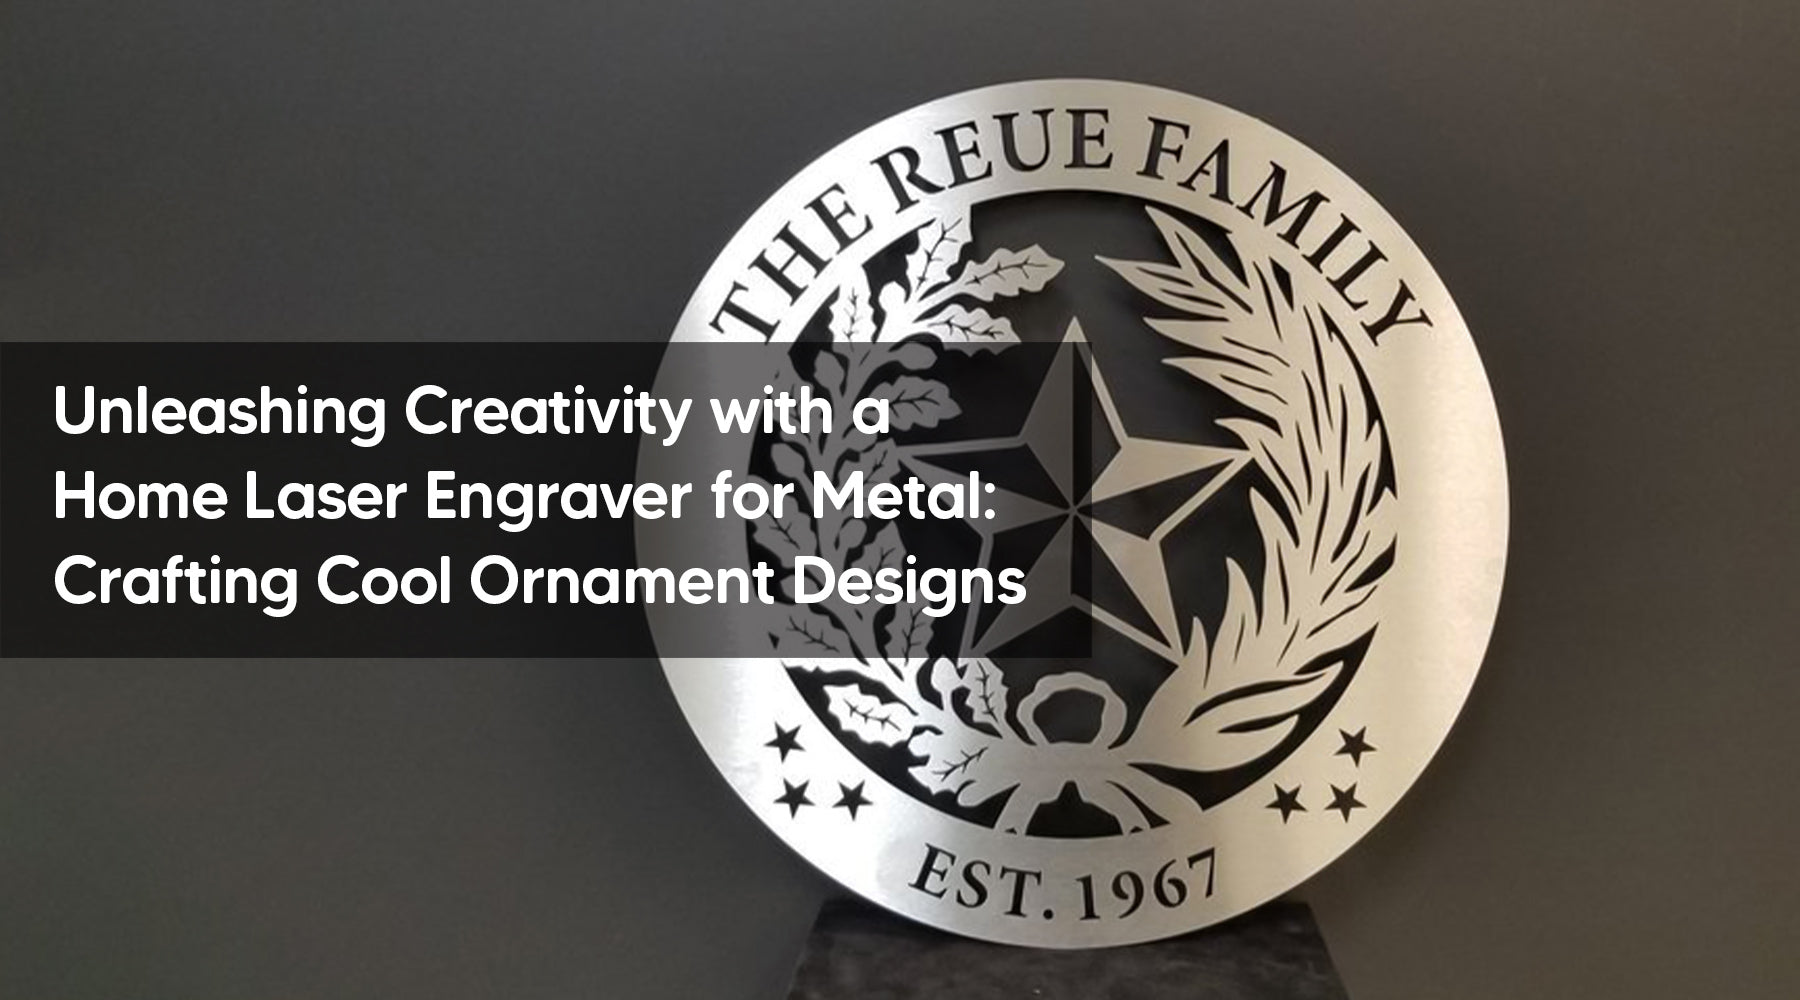 Unleashing Creativity with a Home Laser Engraver for Metal: Crafting Cool Ornament Designs